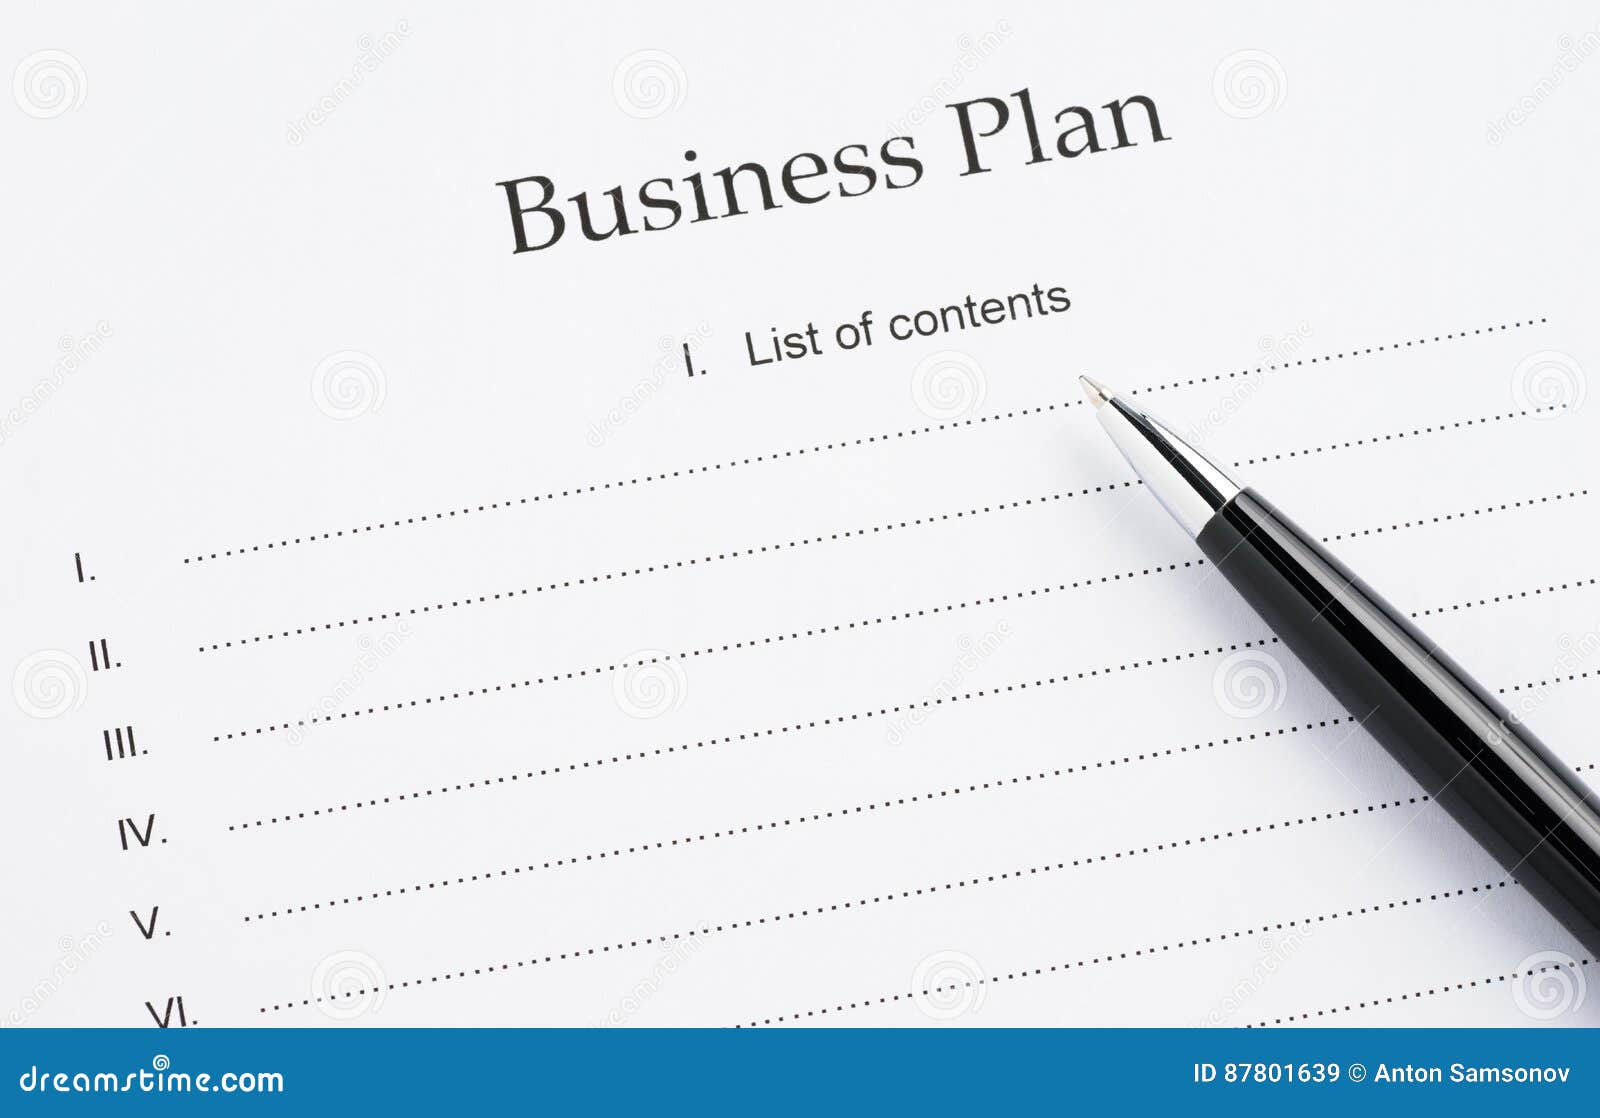 a business plan is a ____ document